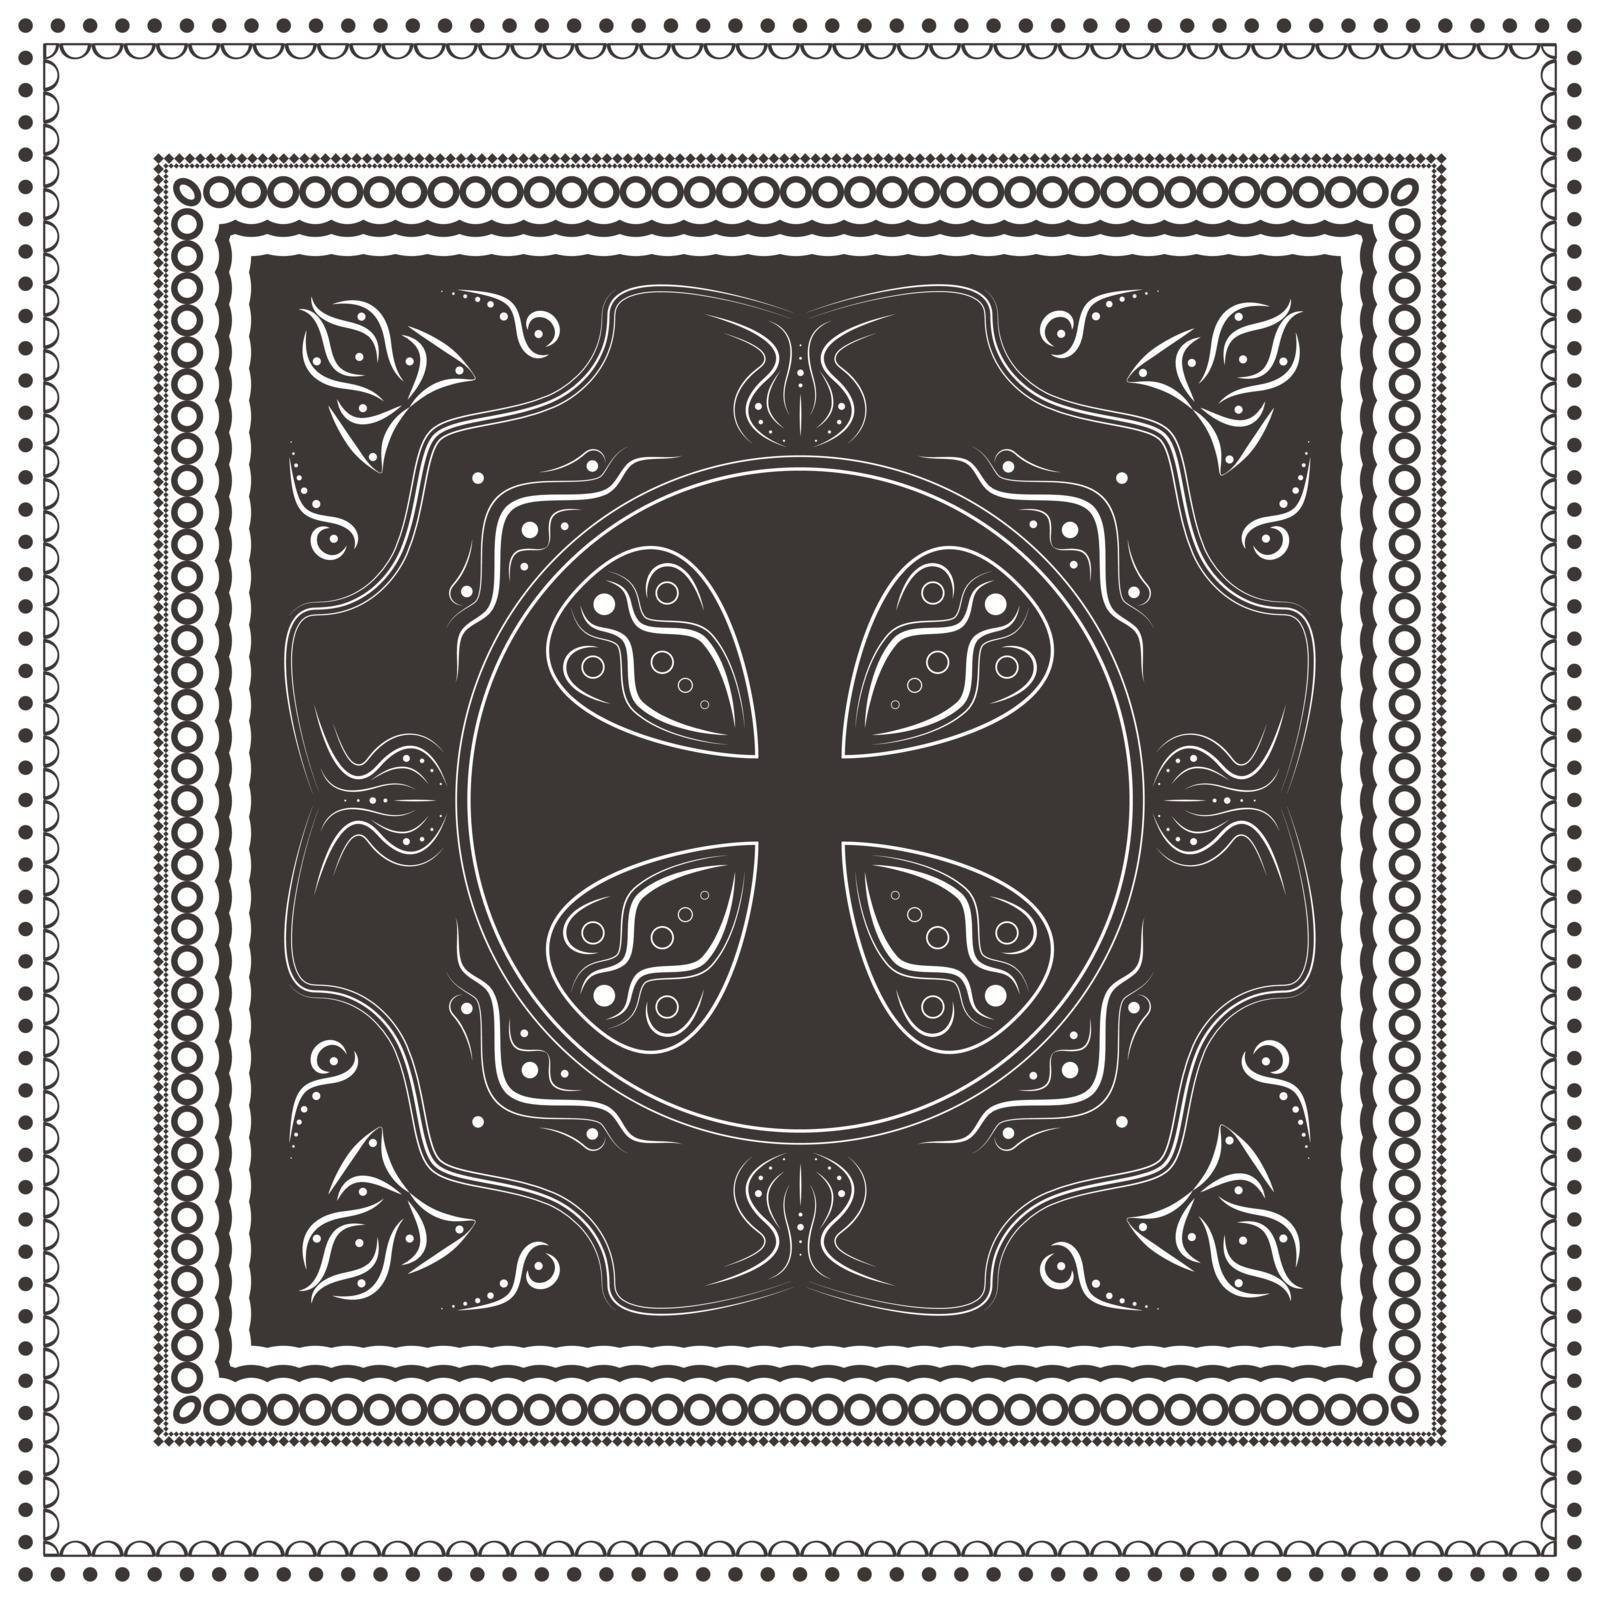 Ornamental seamless pattern - brown squares with linear ornaments.